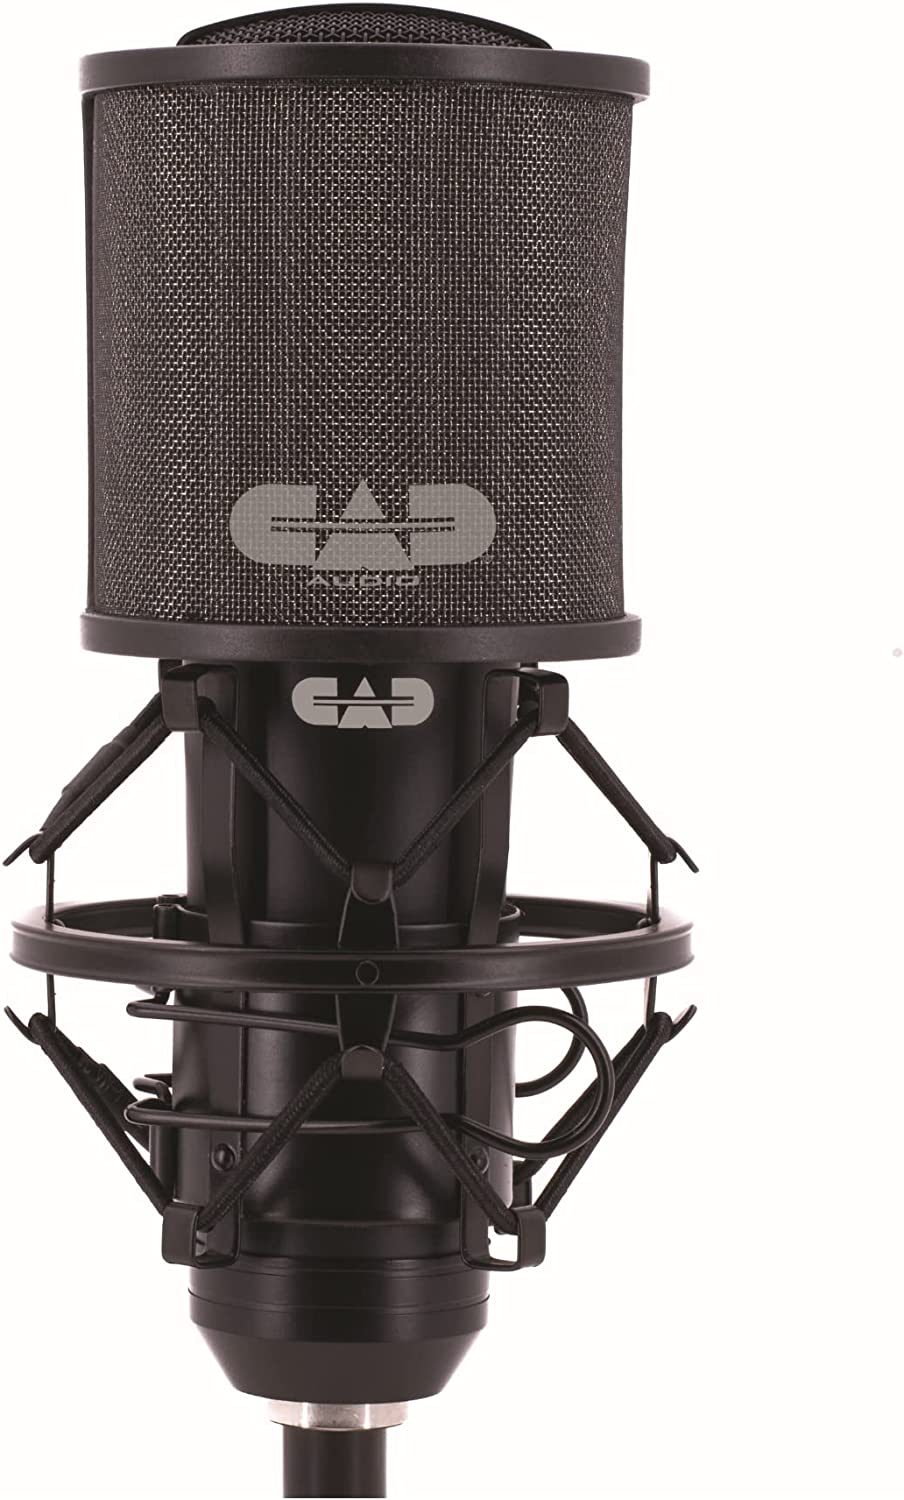 CAD Audio VP3 Compact Pop Filter for Handheld or LCD Microphone